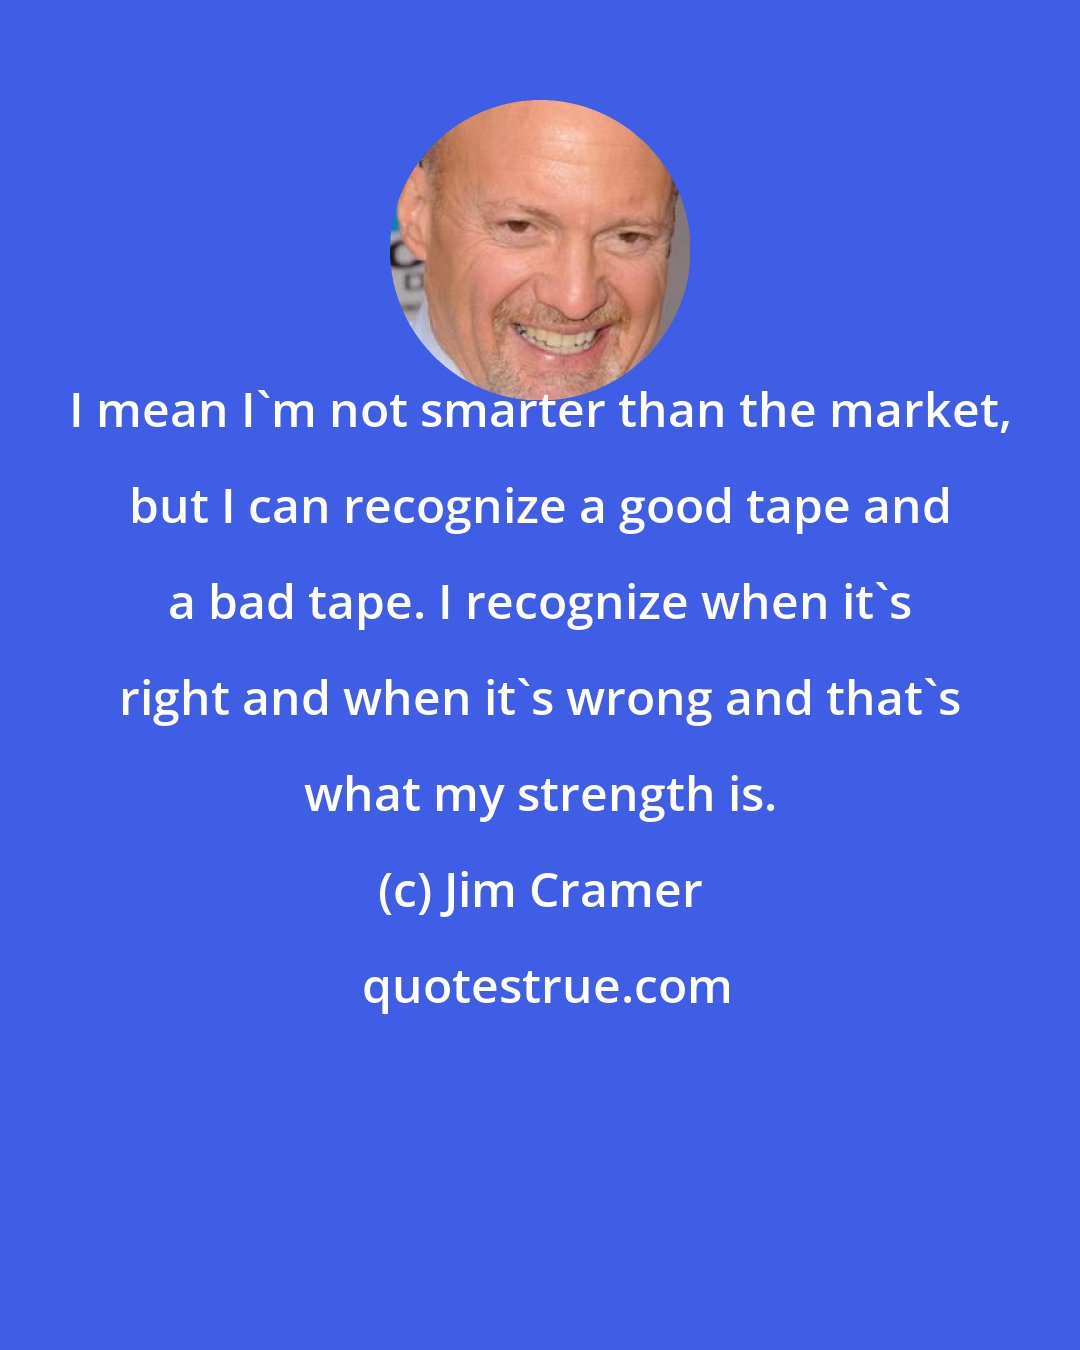 Jim Cramer: I mean I'm not smarter than the market, but I can recognize a good tape and a bad tape. I recognize when it's right and when it's wrong and that's what my strength is.